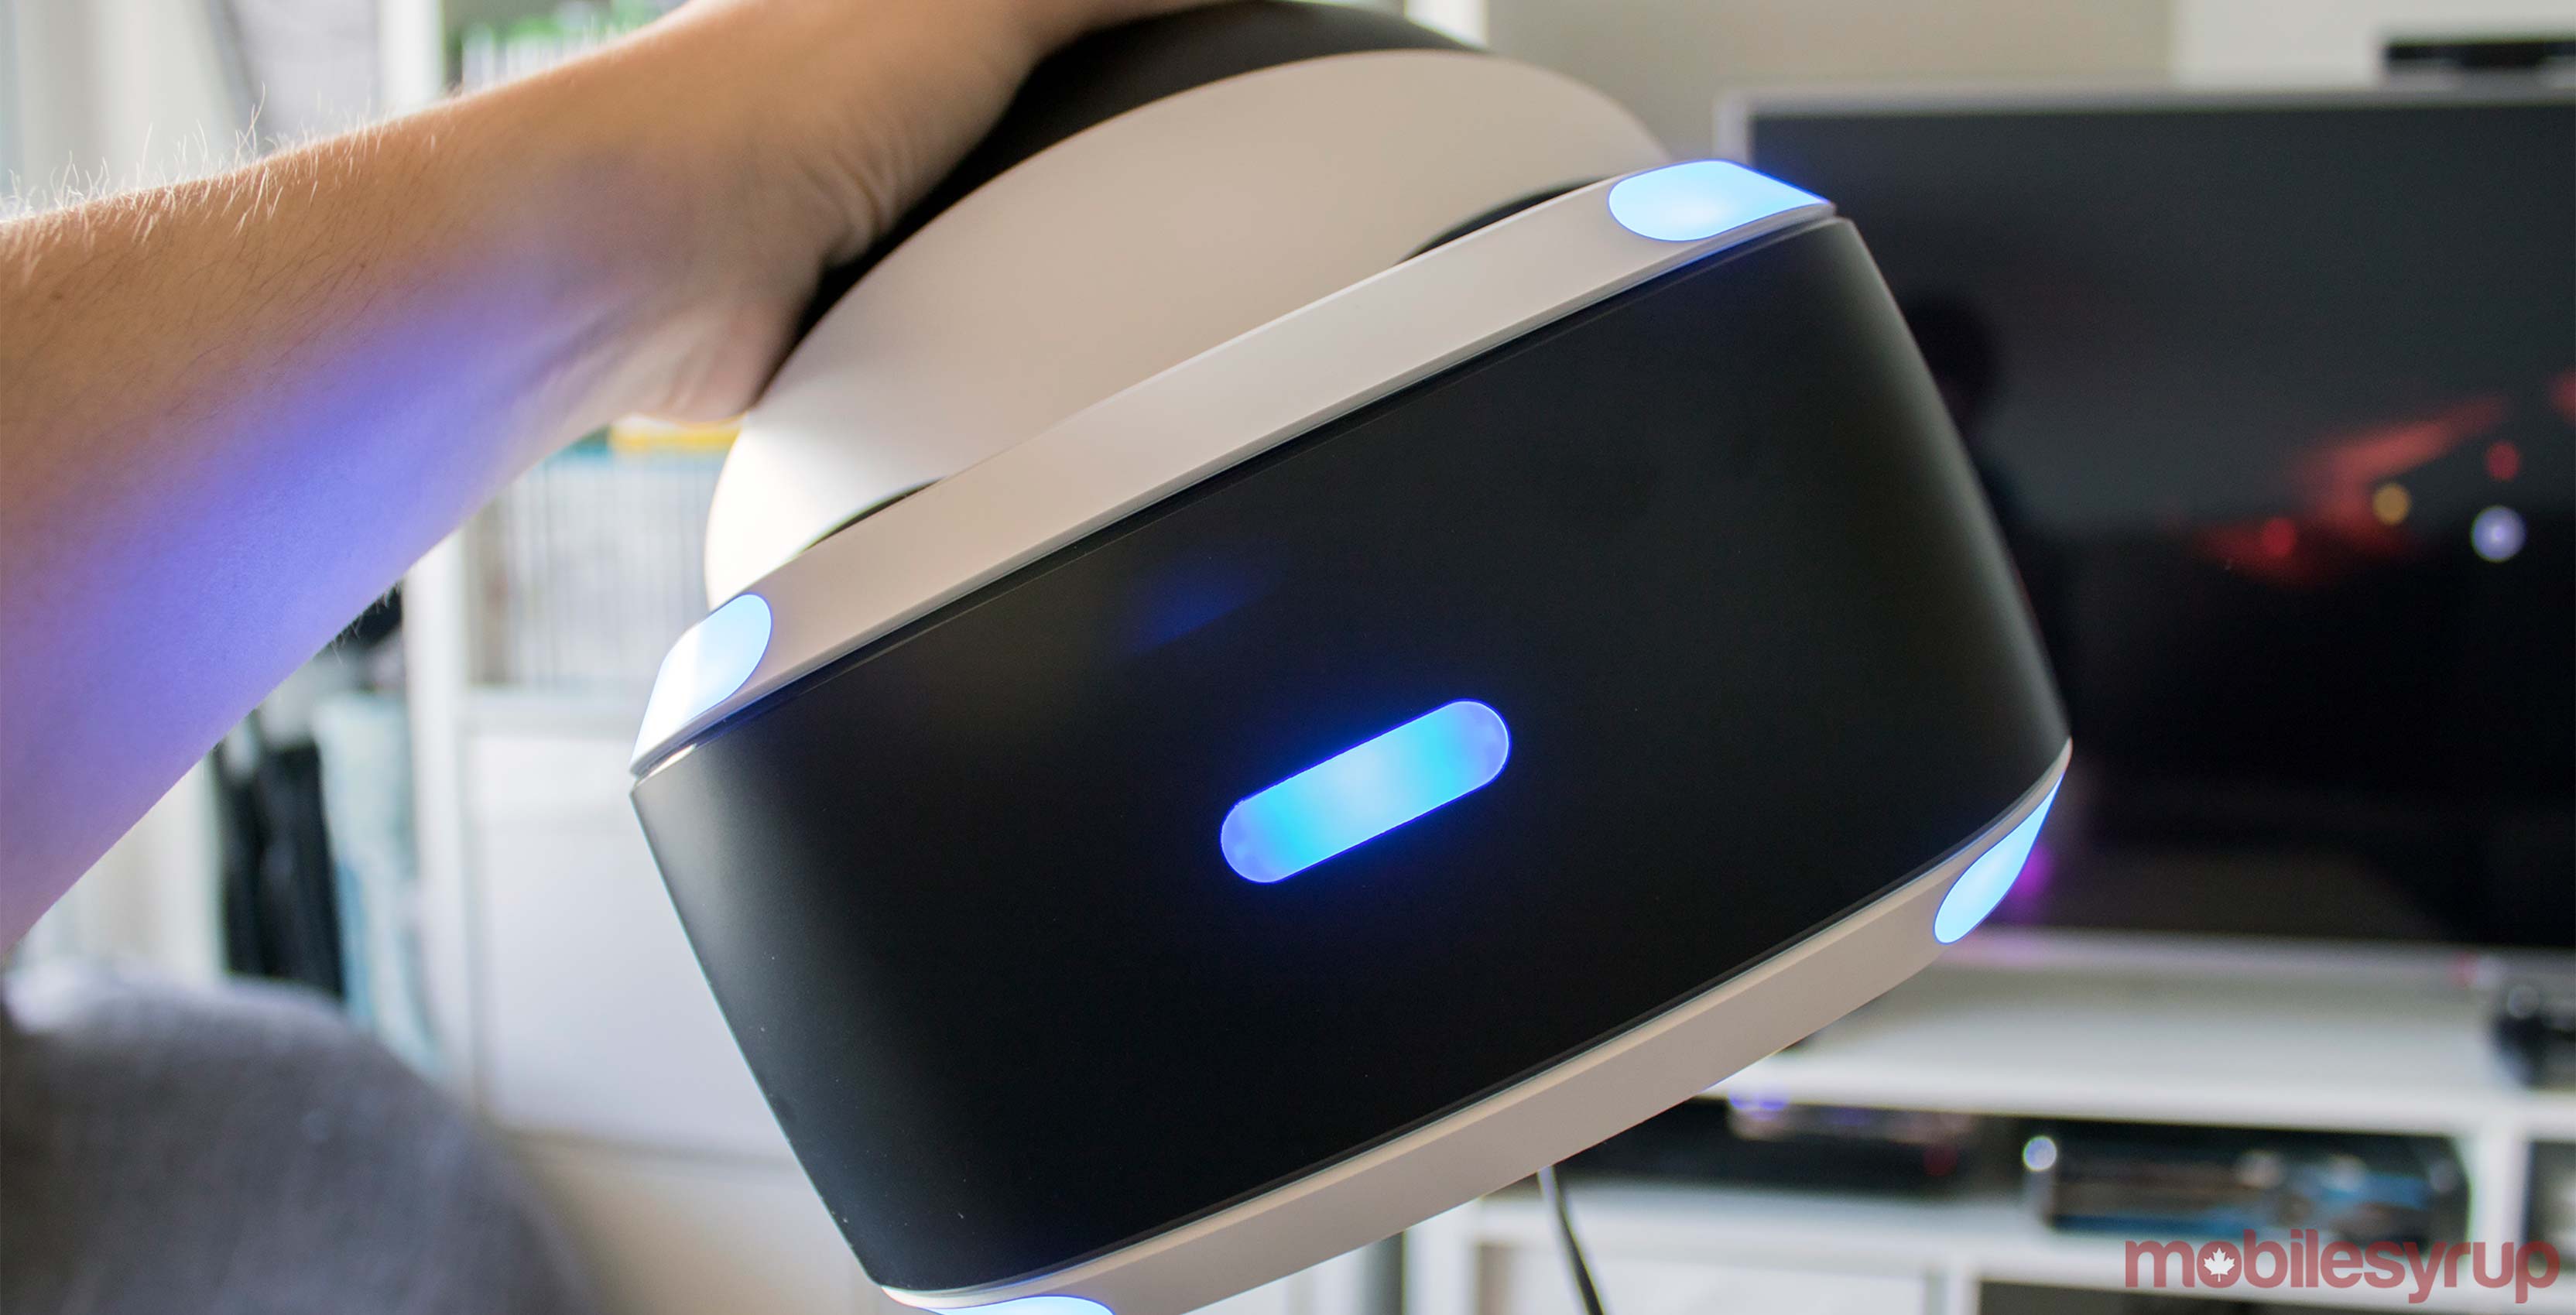 PlayStation VR in hand